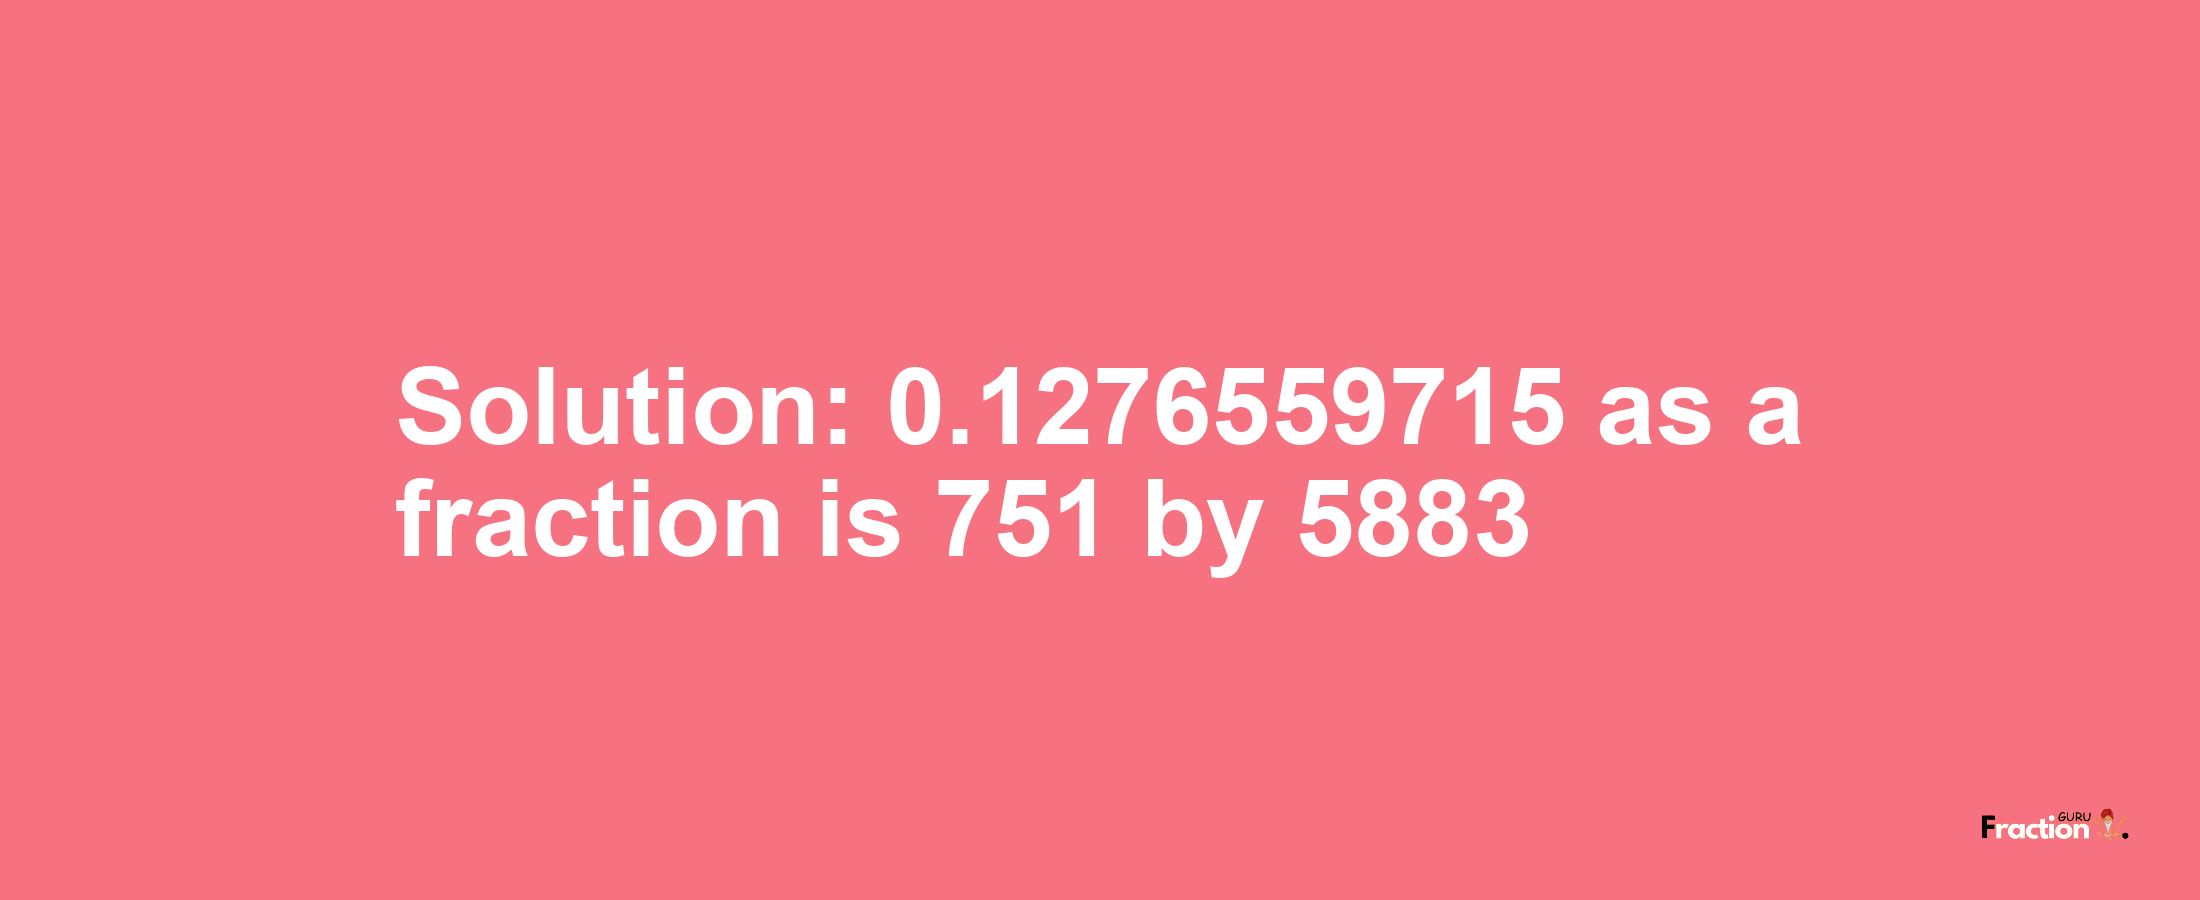 Solution:0.1276559715 as a fraction is 751/5883